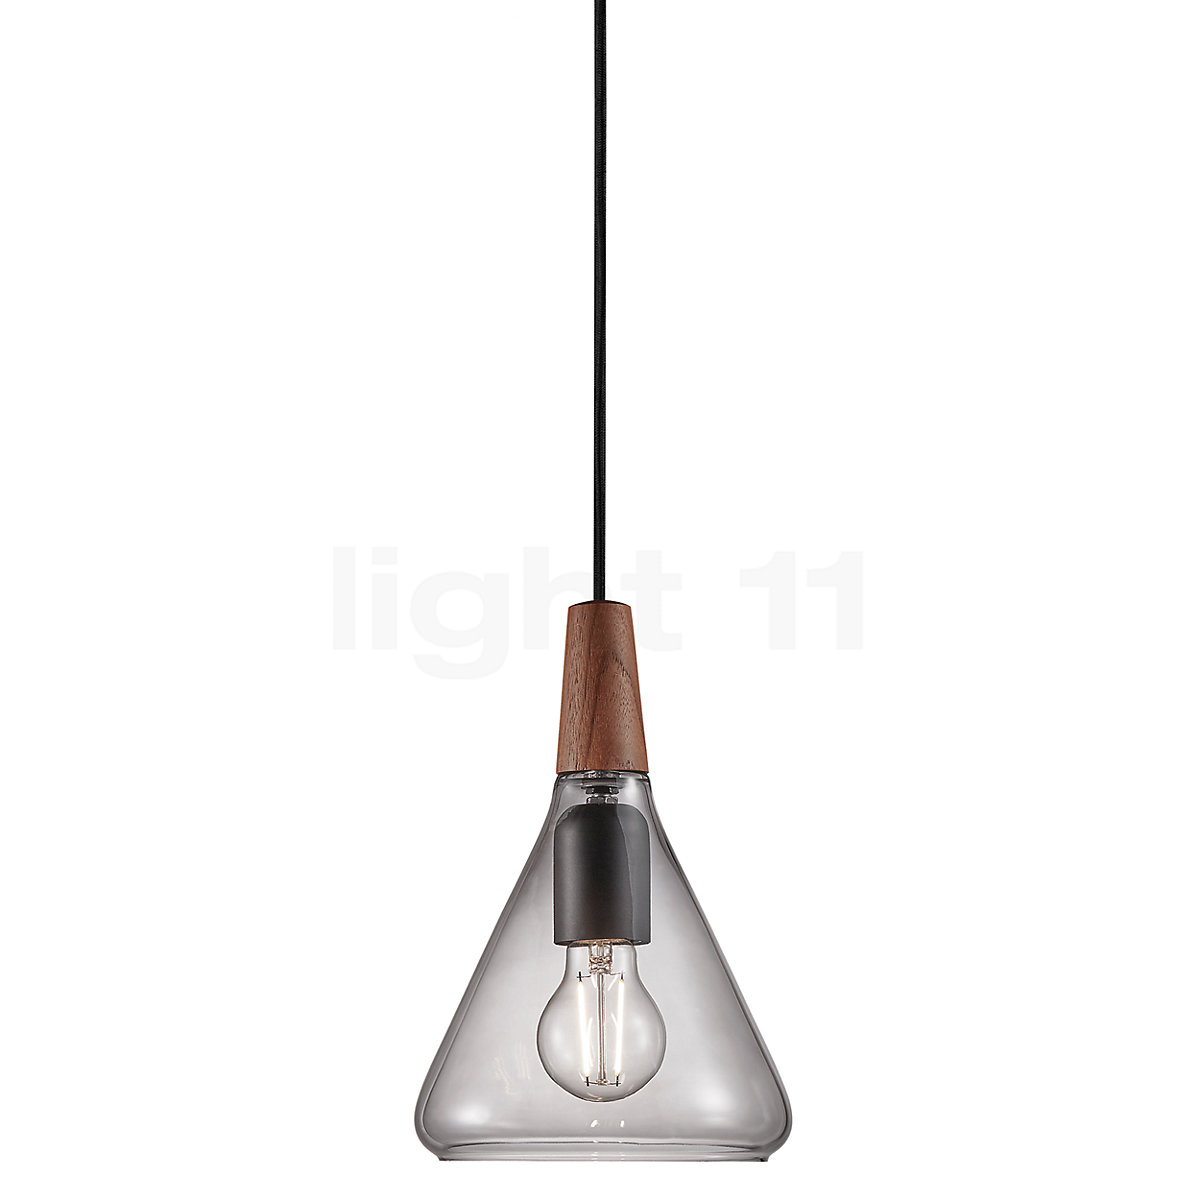 Buy Design for the People at Light Nori Pendant